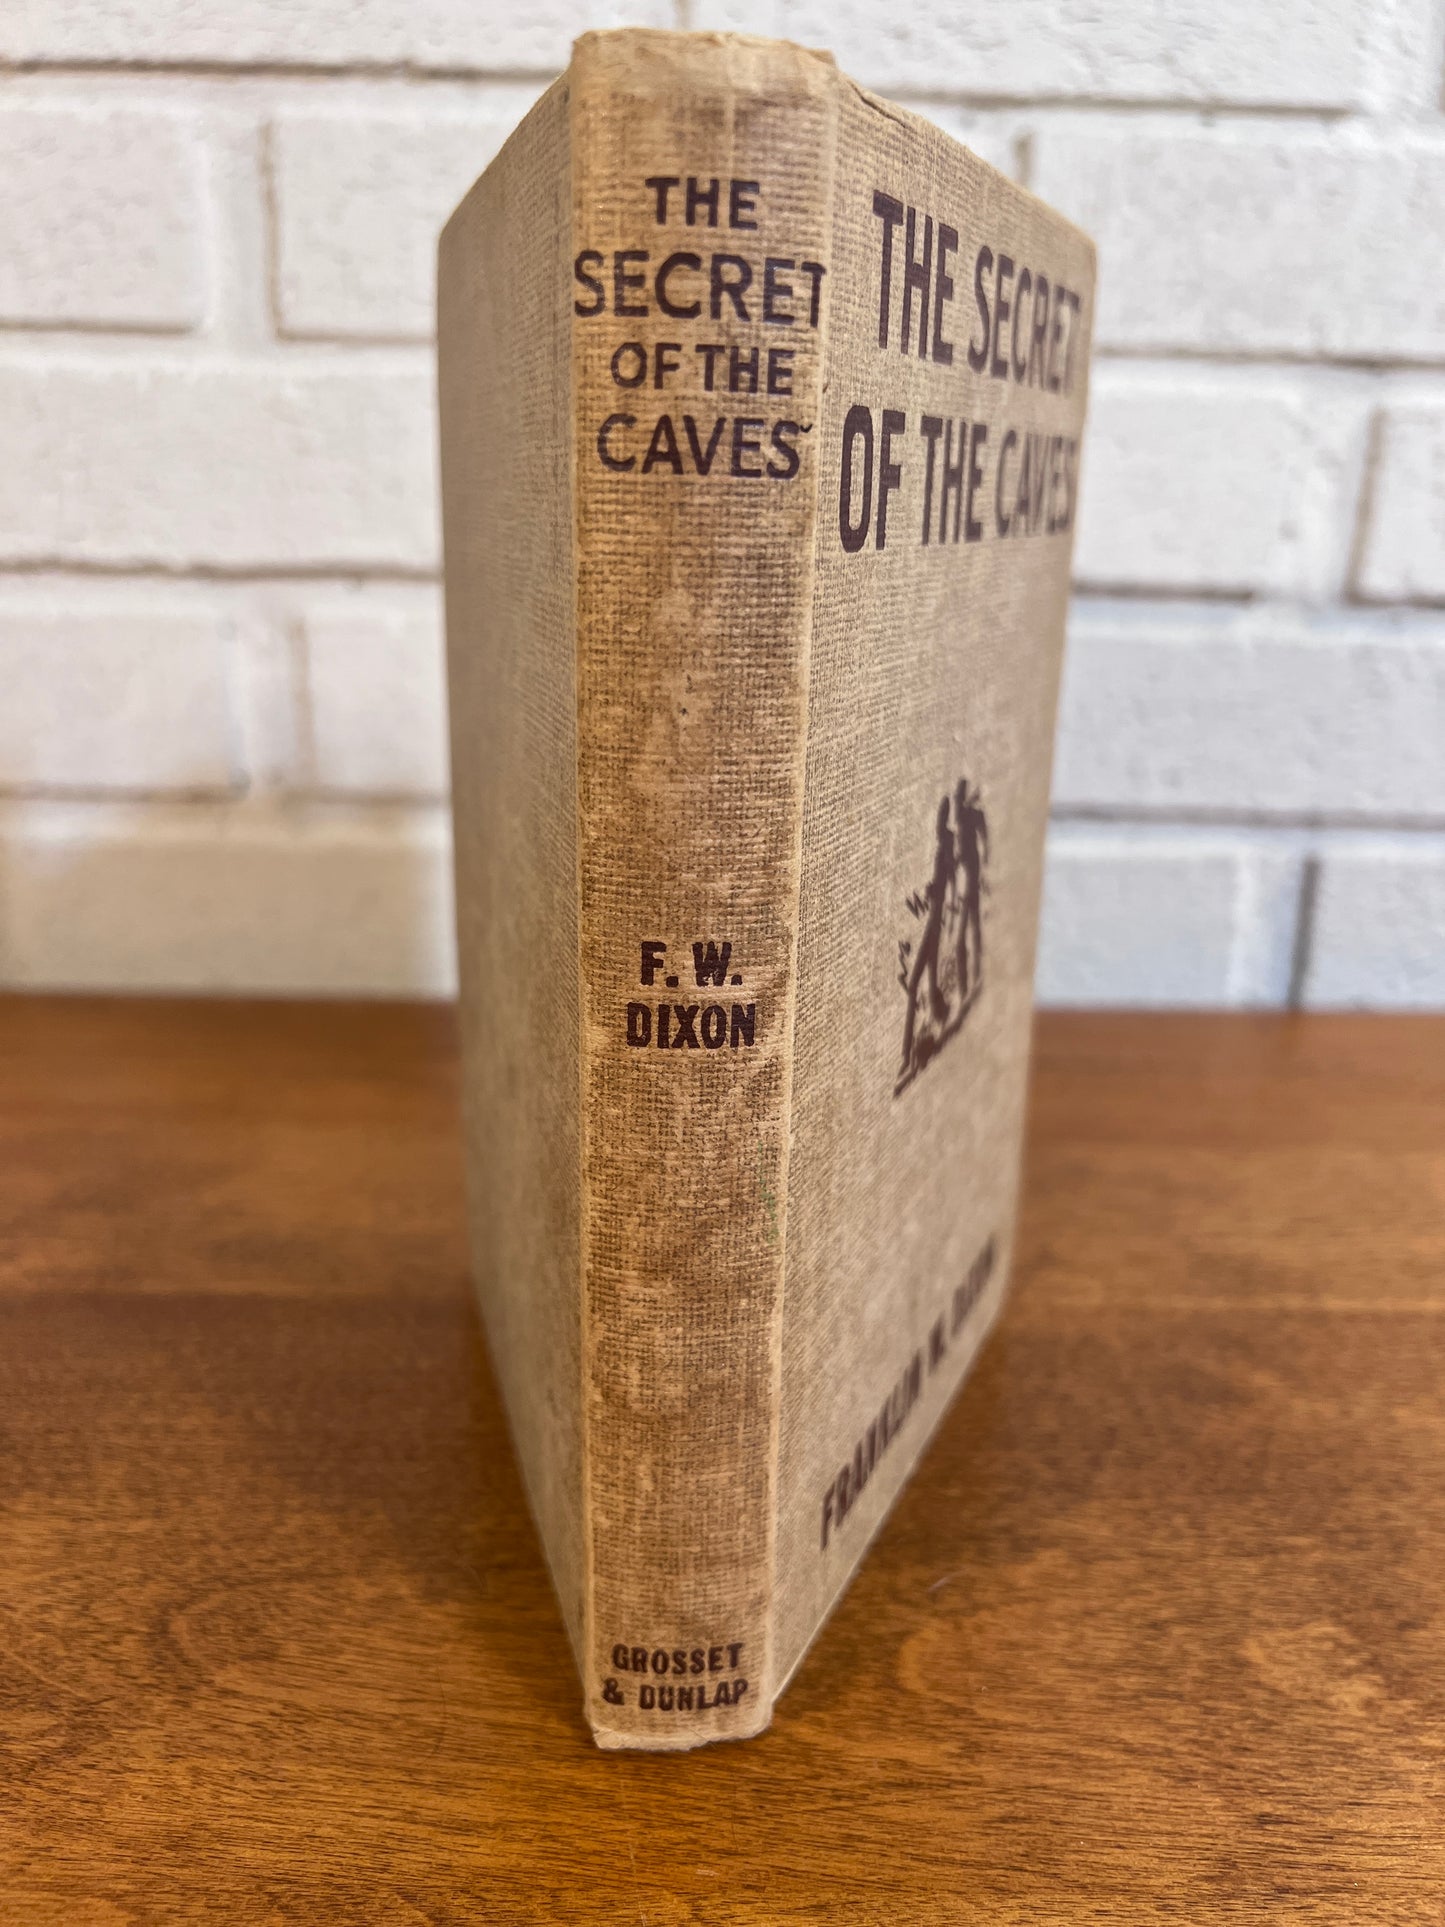 The Secret of the Caves #7 by Franklin W. Dixon - The Hardy Boys